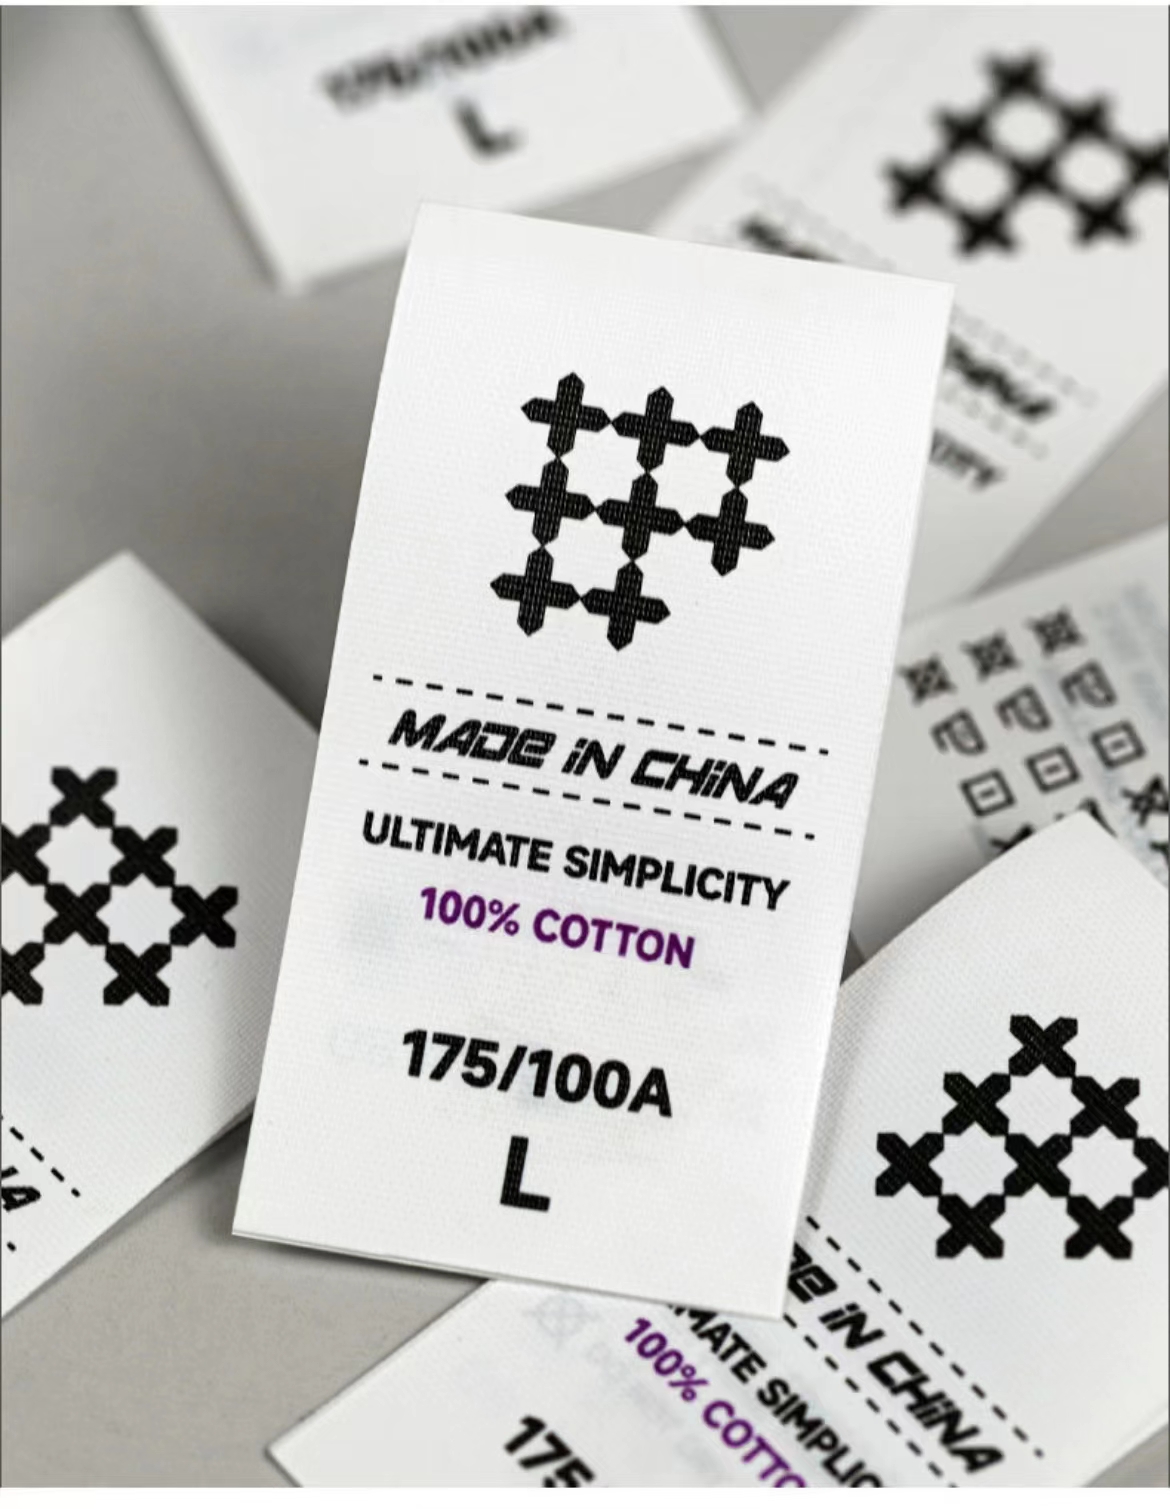 Quality clothing labels from china